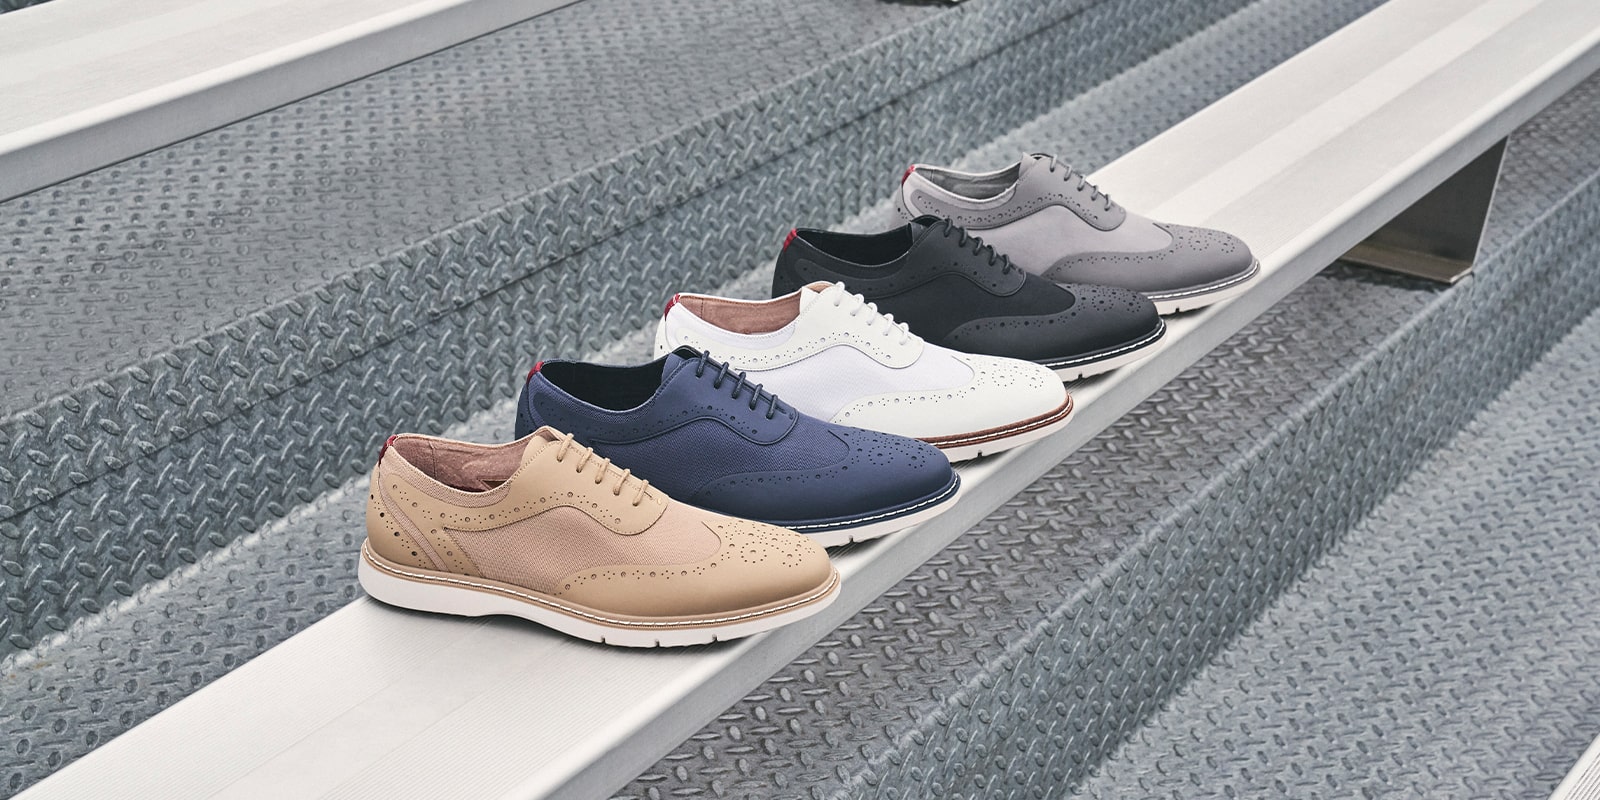 The featured products are the Summit Wingtip Lace Up in Khaki, Navy, White, Black, and Gray.